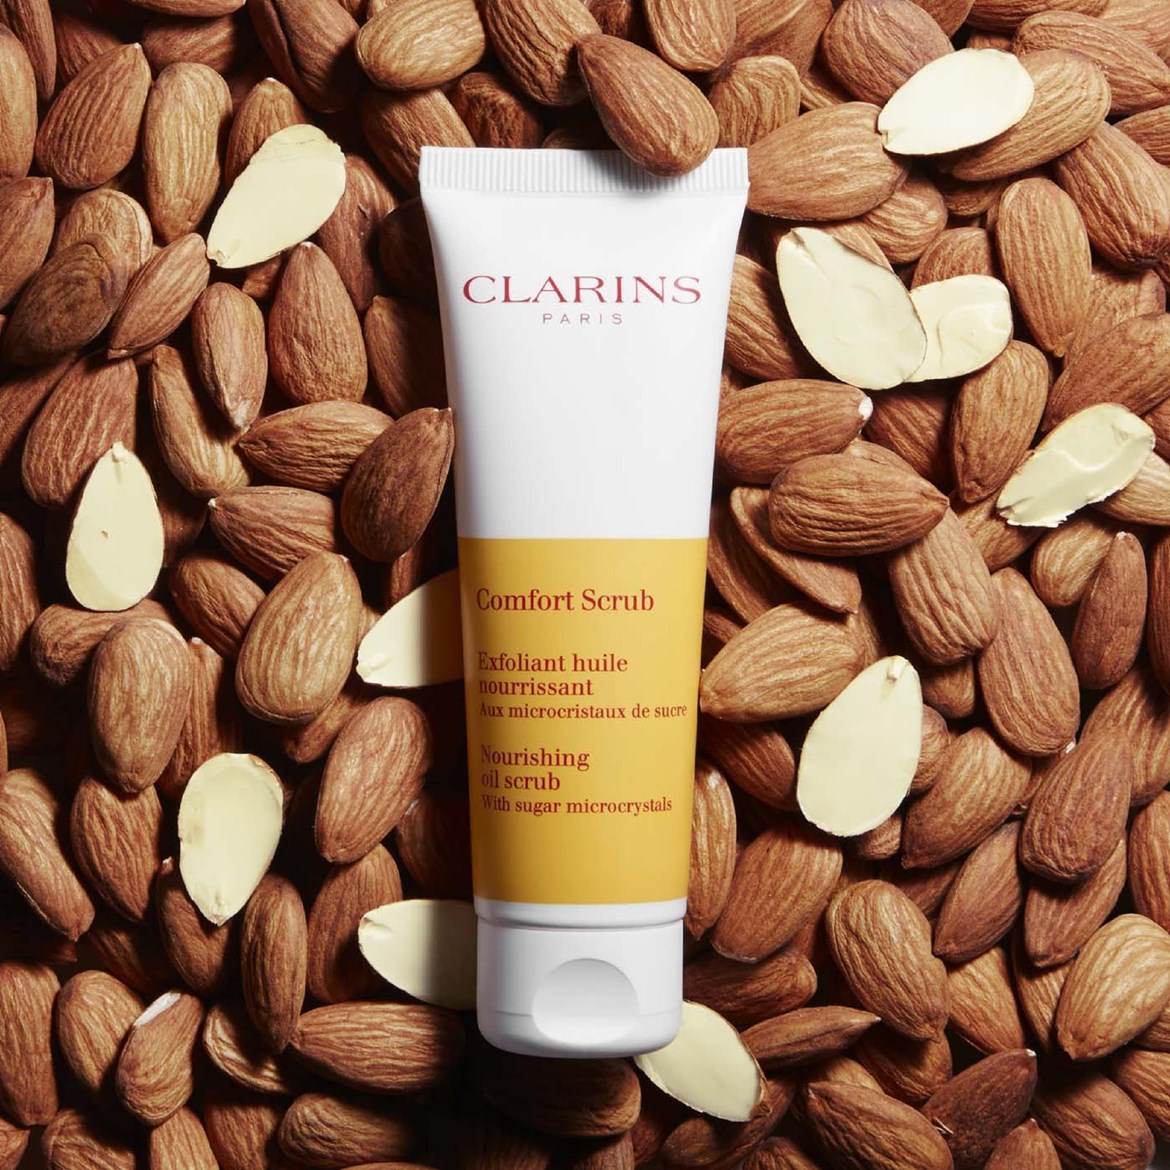 My Summer Glow Routine By Clarins! SweetCare United States